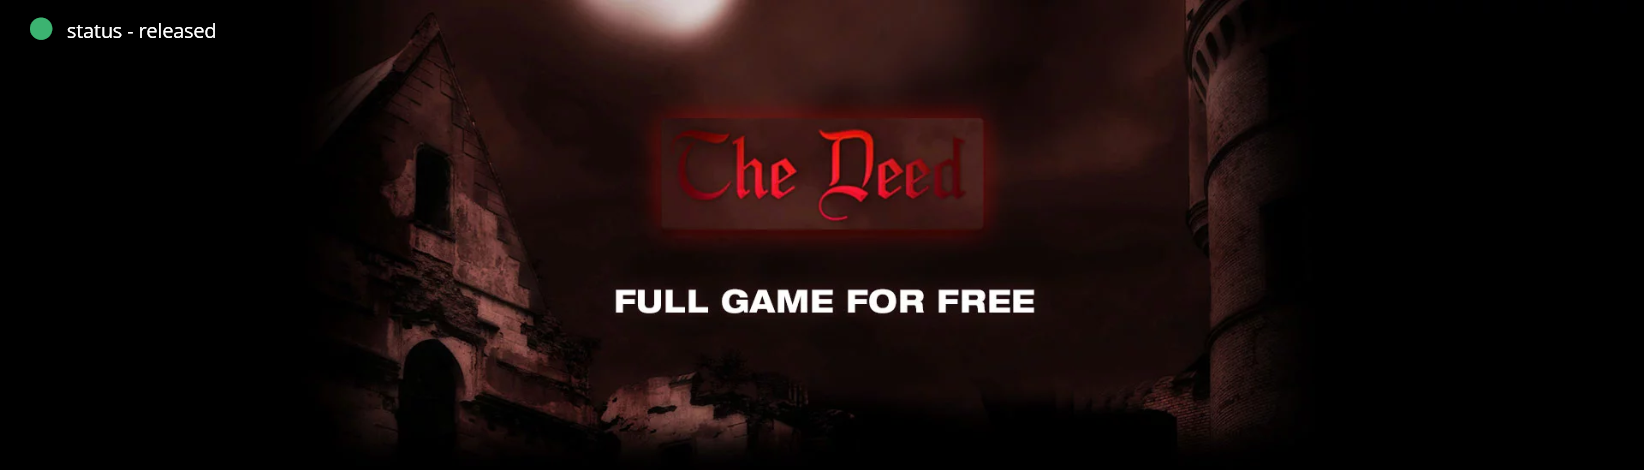 Screenshot_2019-06-23 The deed Indiegala Developers.png